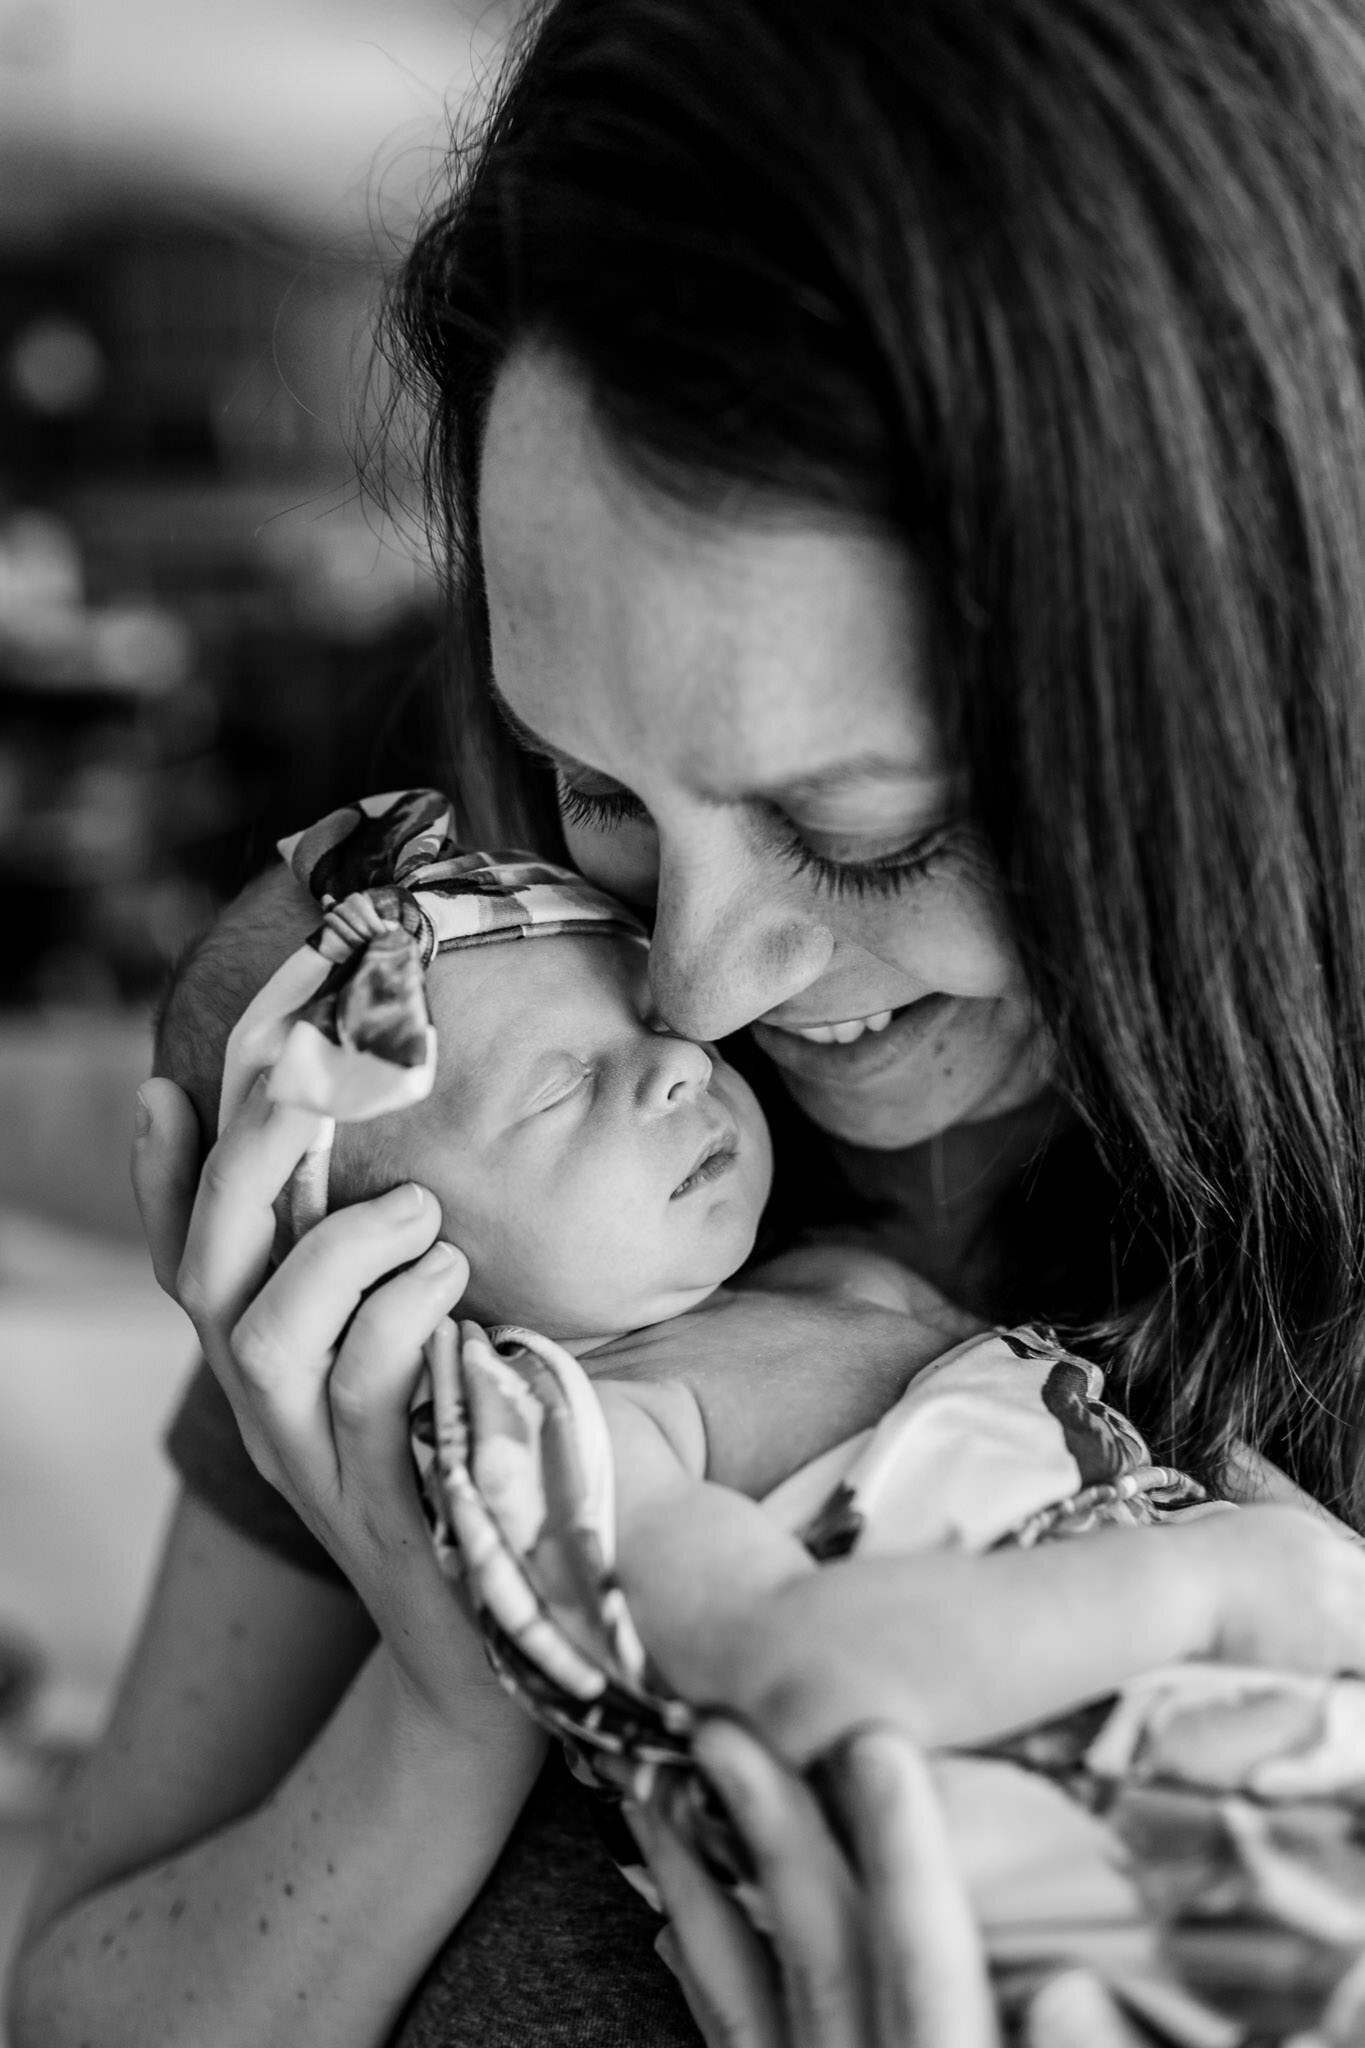 Hillsborough Newborn Photographer | By G. Lin Photography | Black and white photo of mother holding baby girl